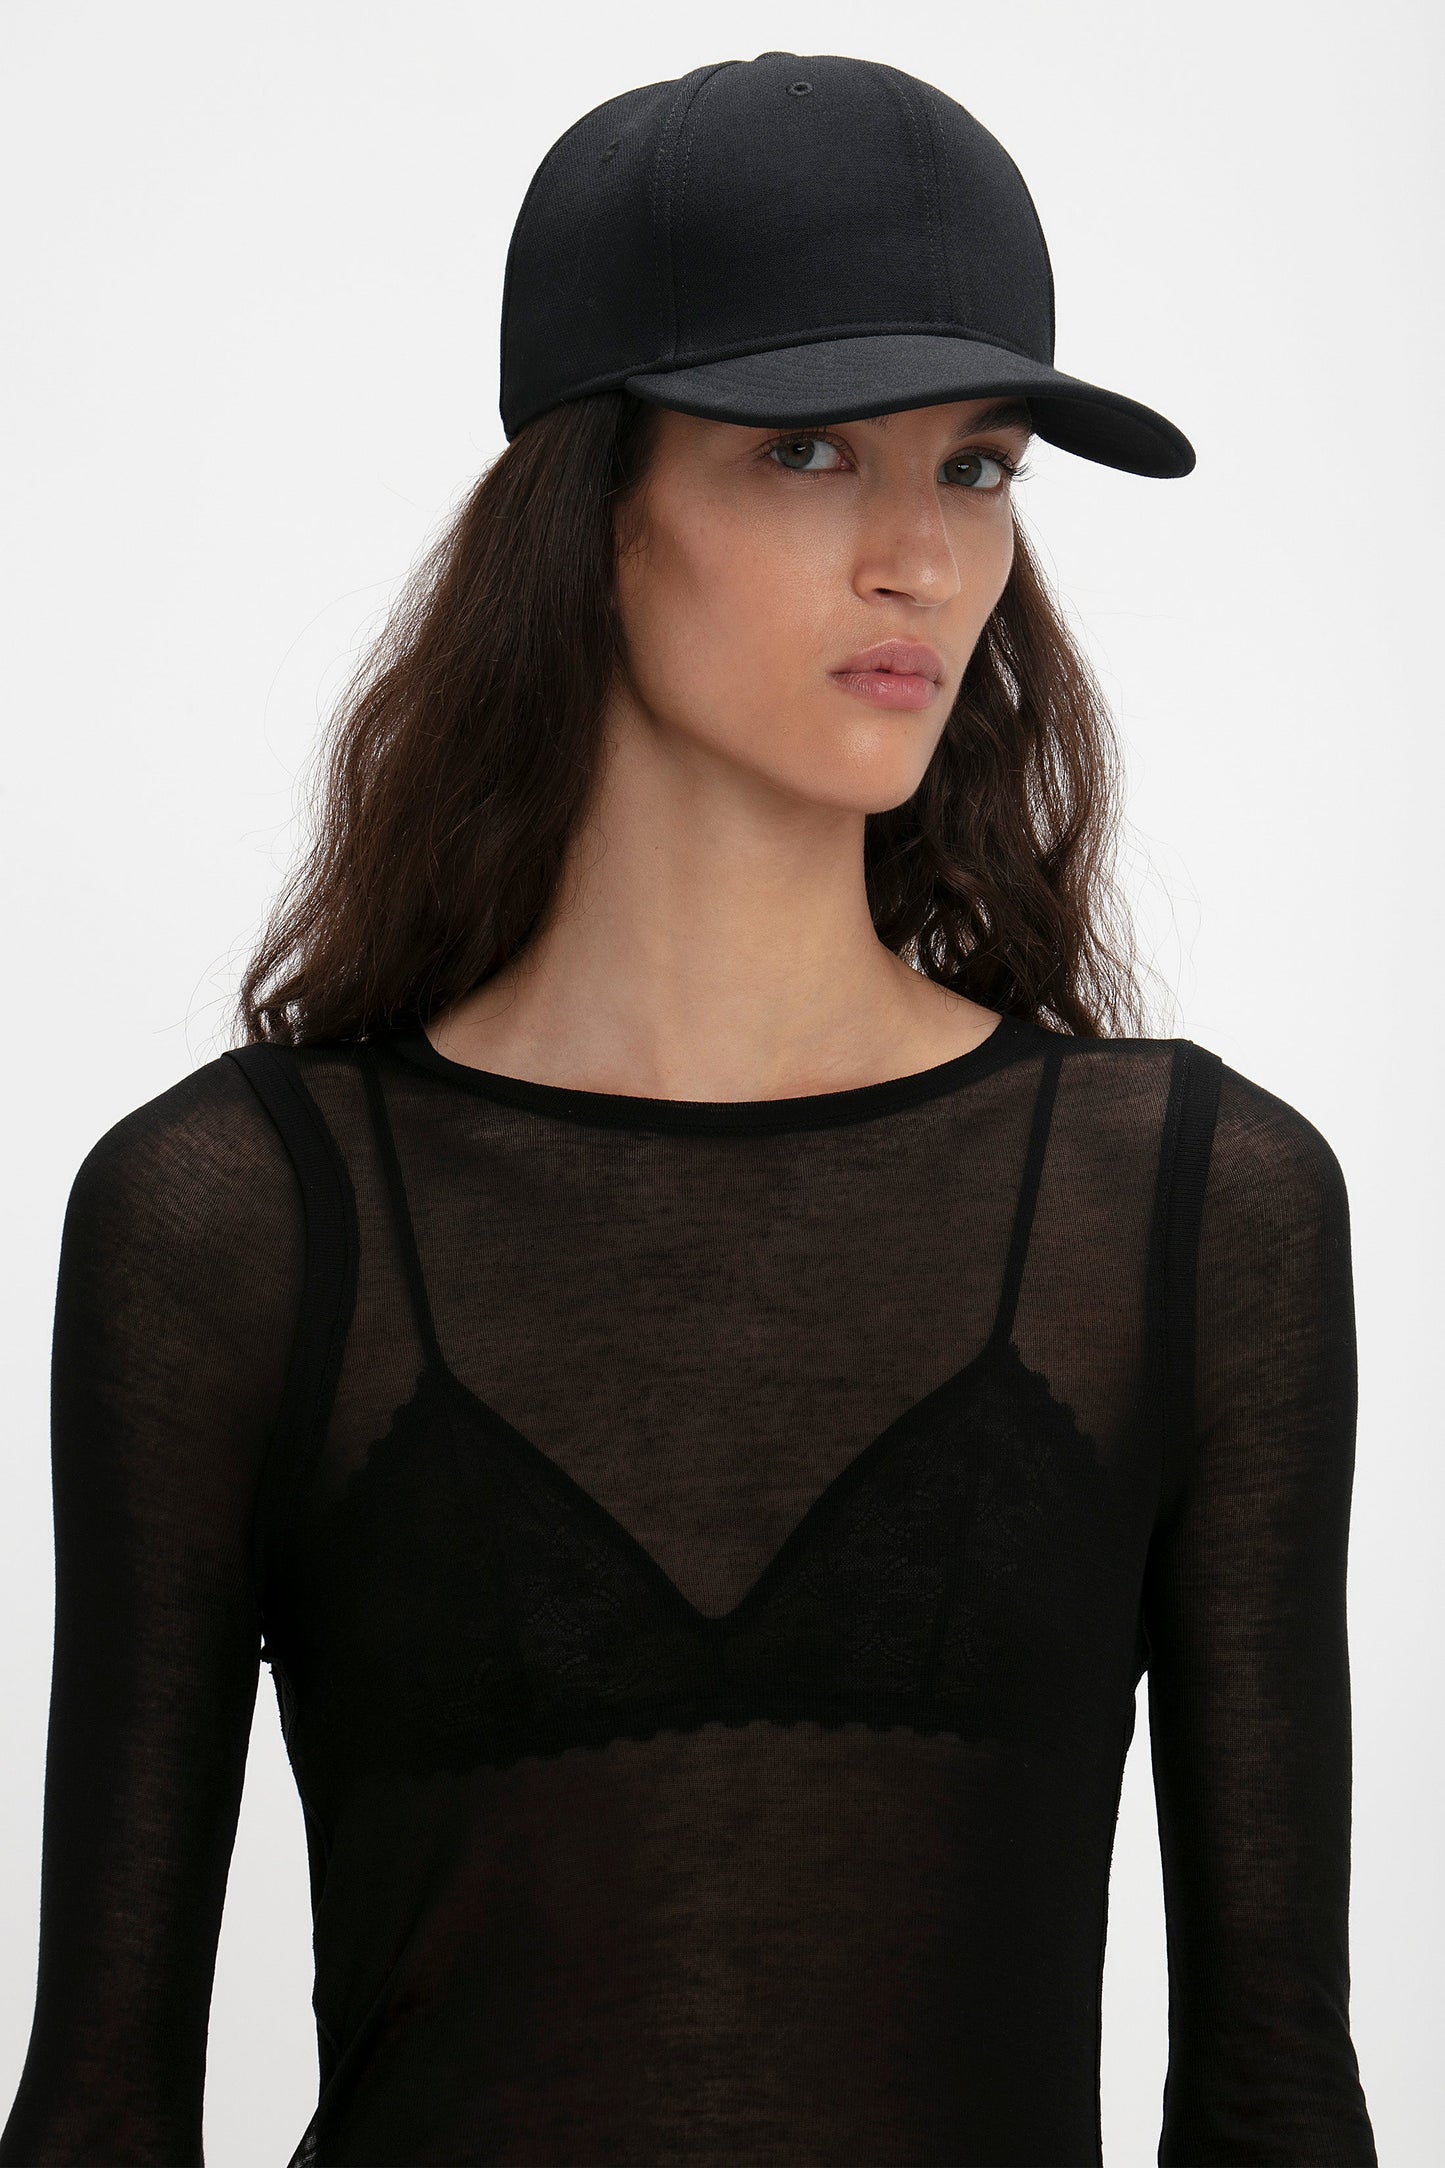 Woman wearing a Victoria Beckham Exclusive Logo Cap in Black and sheer black top with lace details, looking to the side against a white background.